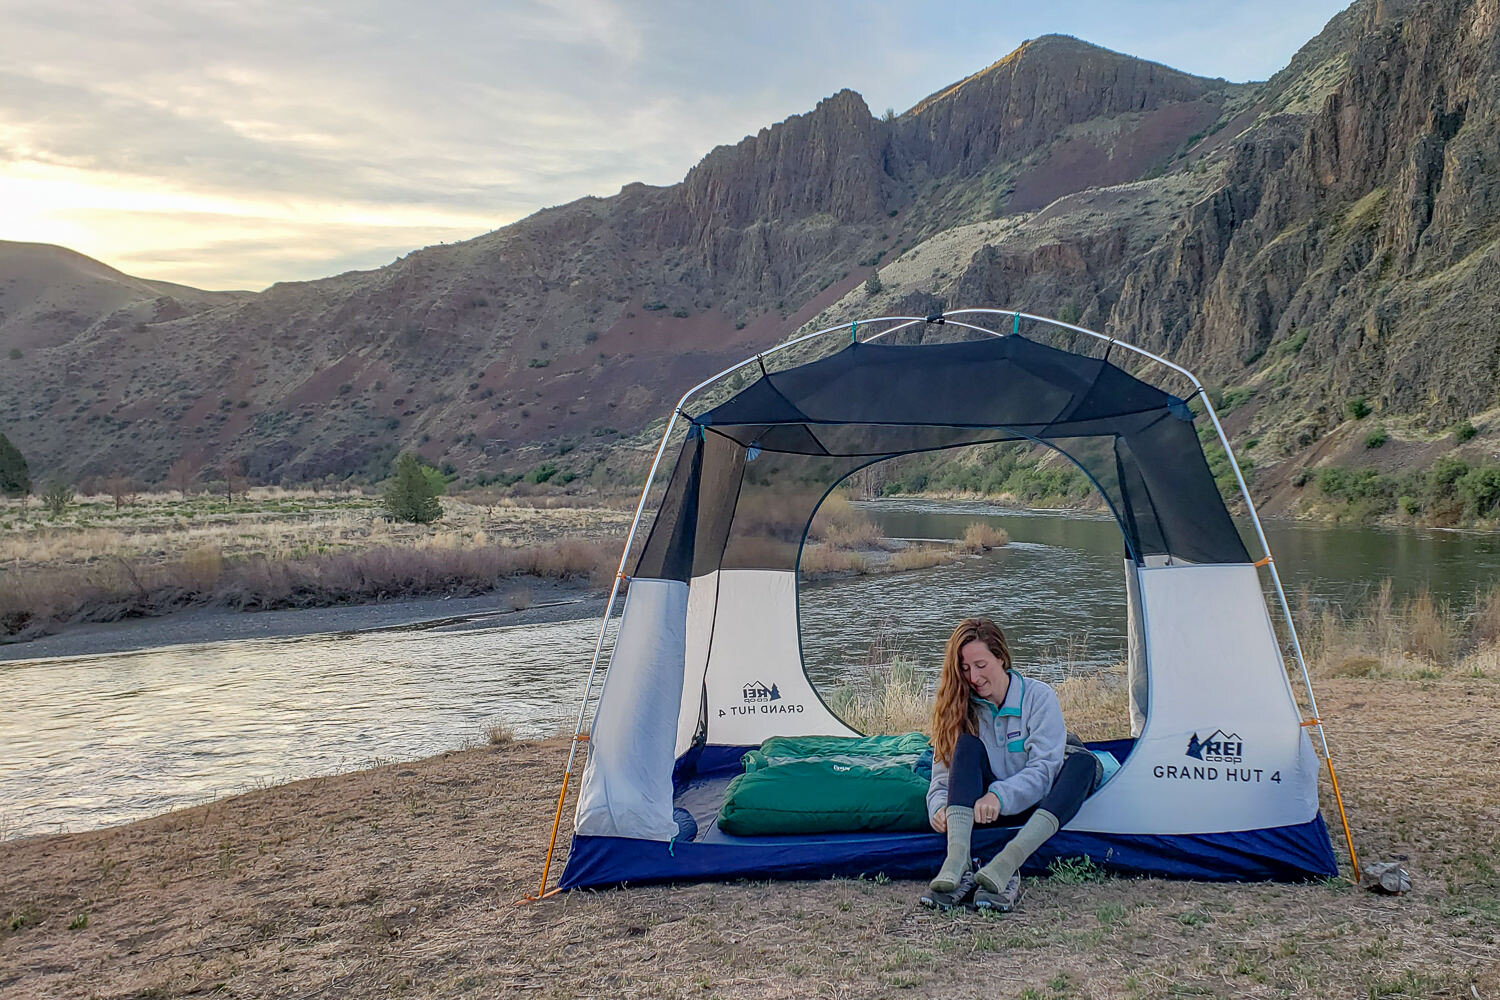 The REI Grand Hut 4 is one of our favorite camping tents because it’s easy to set up, tall enough to stand in, and hold up well to bad weather